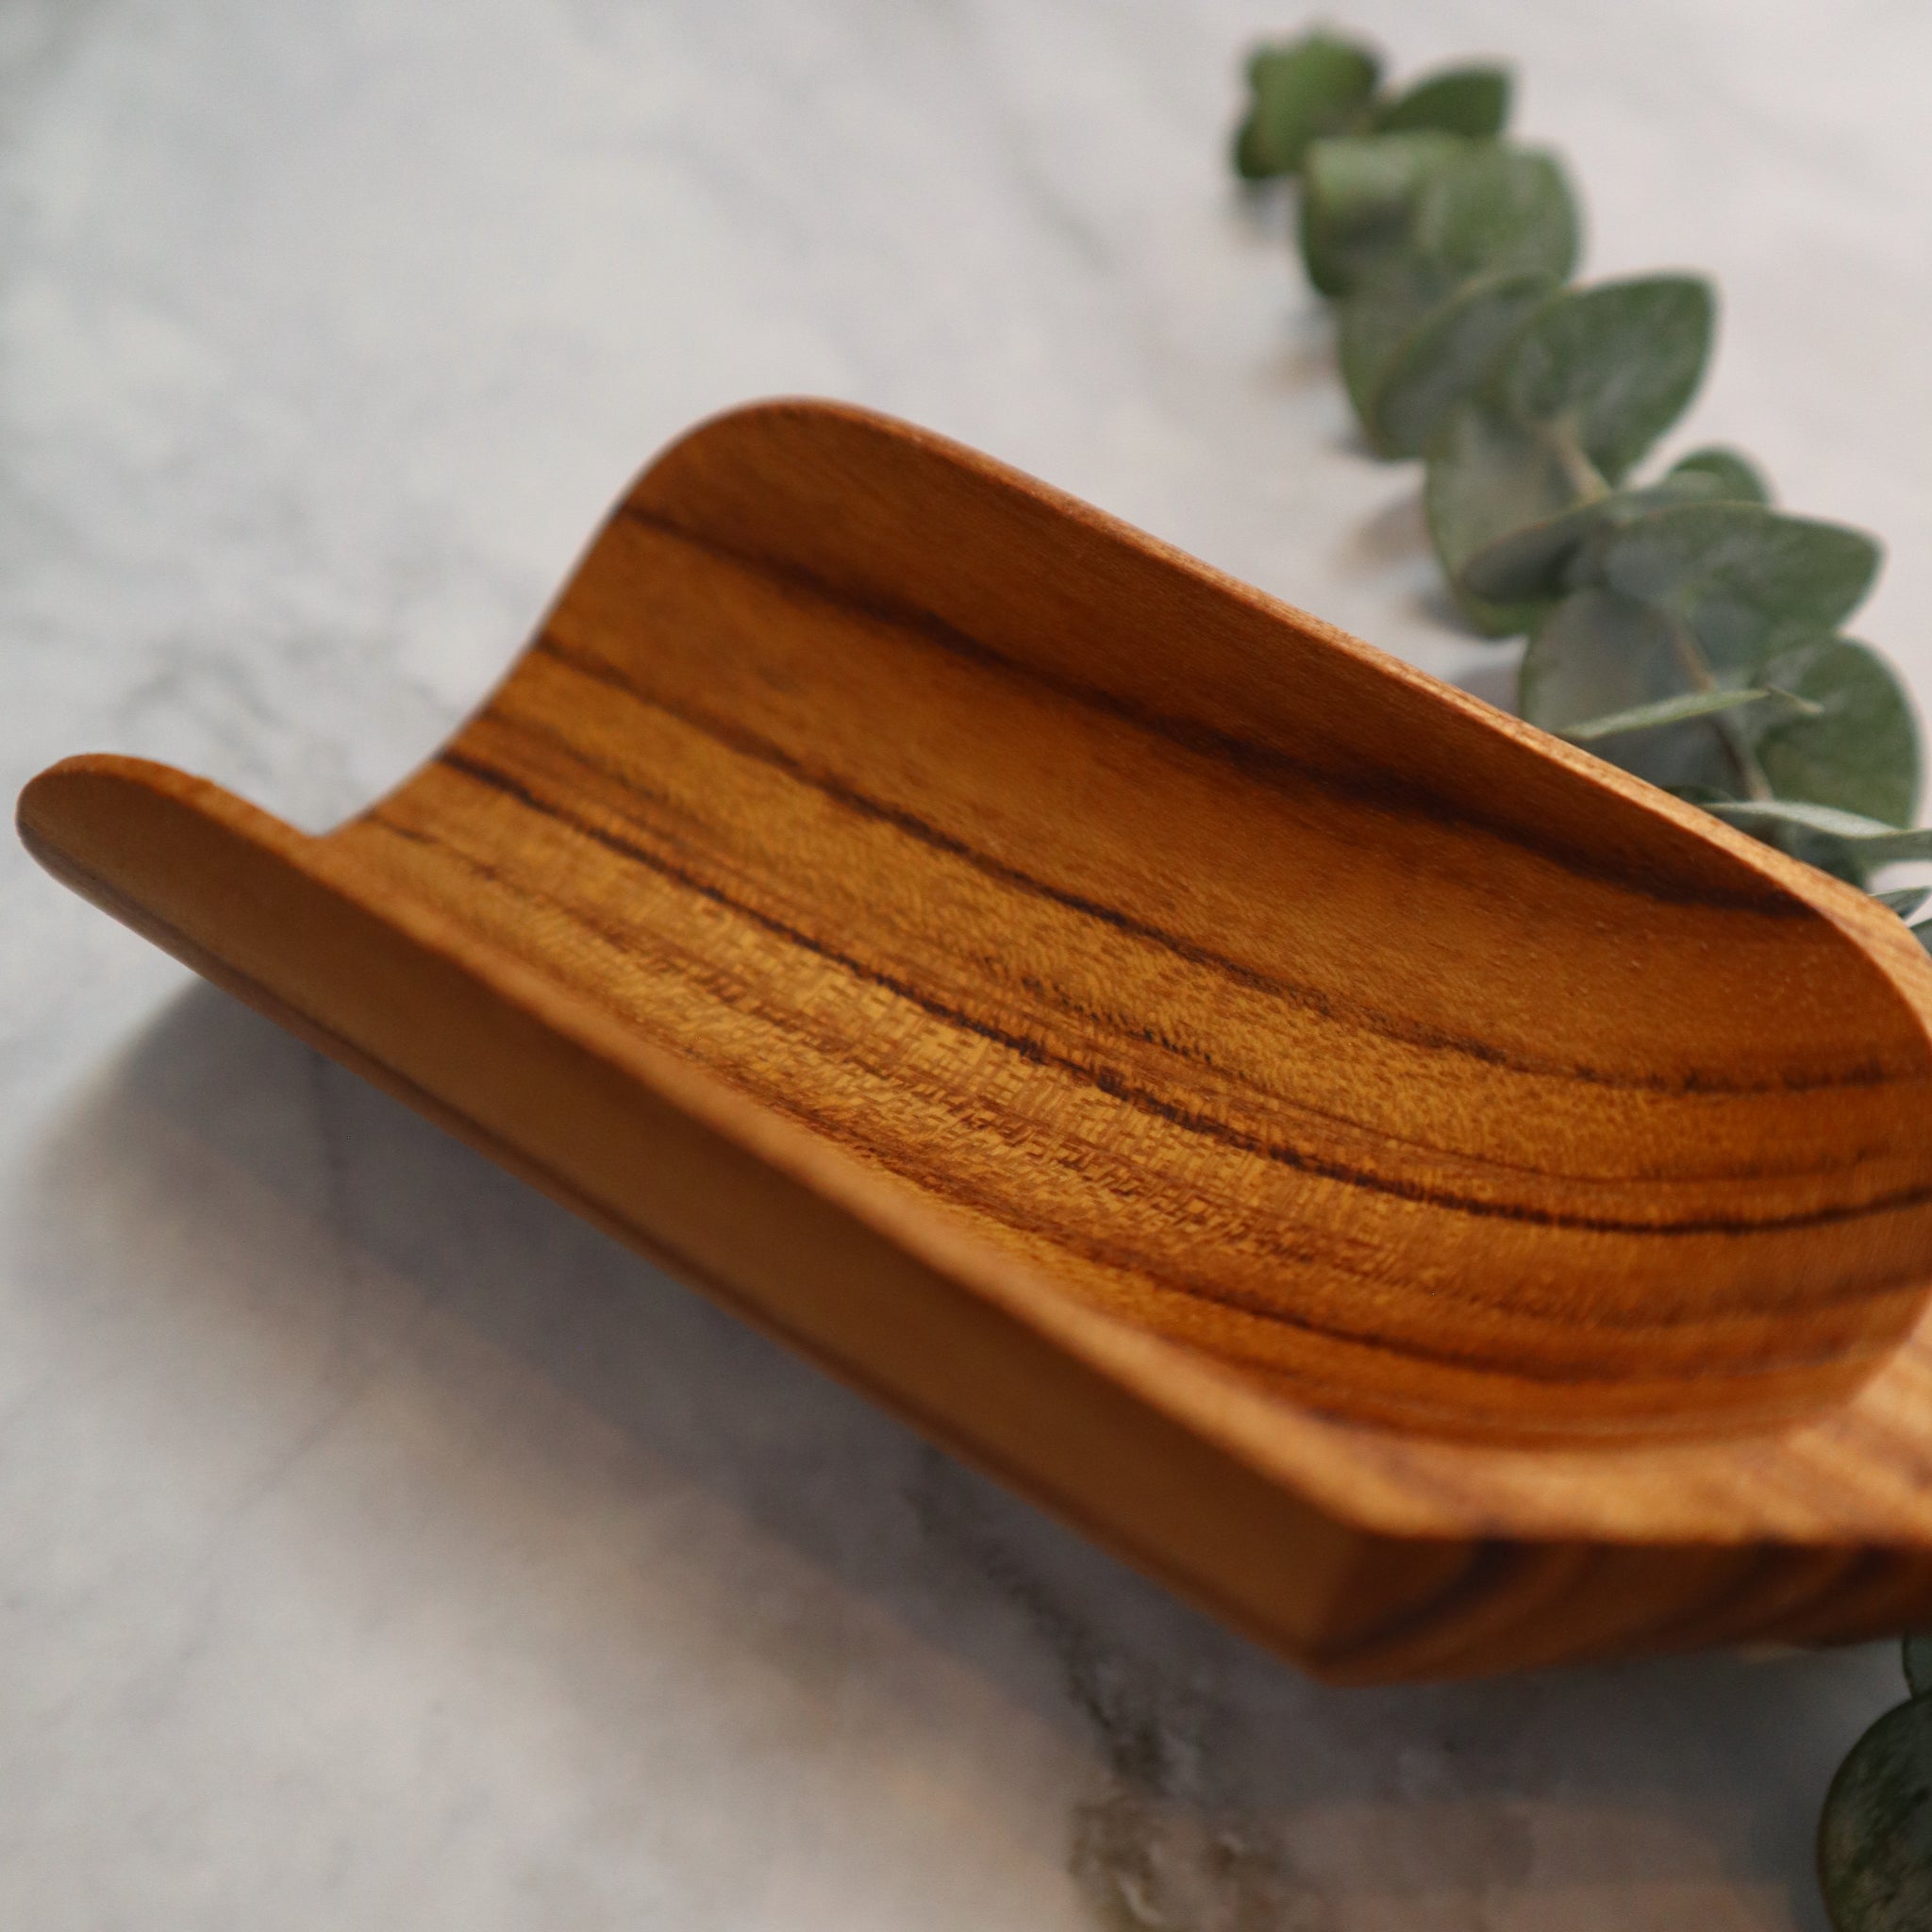 INDONESIAN TEAK WOOD SCOOP (FOR RICE, FLOUR, GRAINS, AND SPA DECOR)